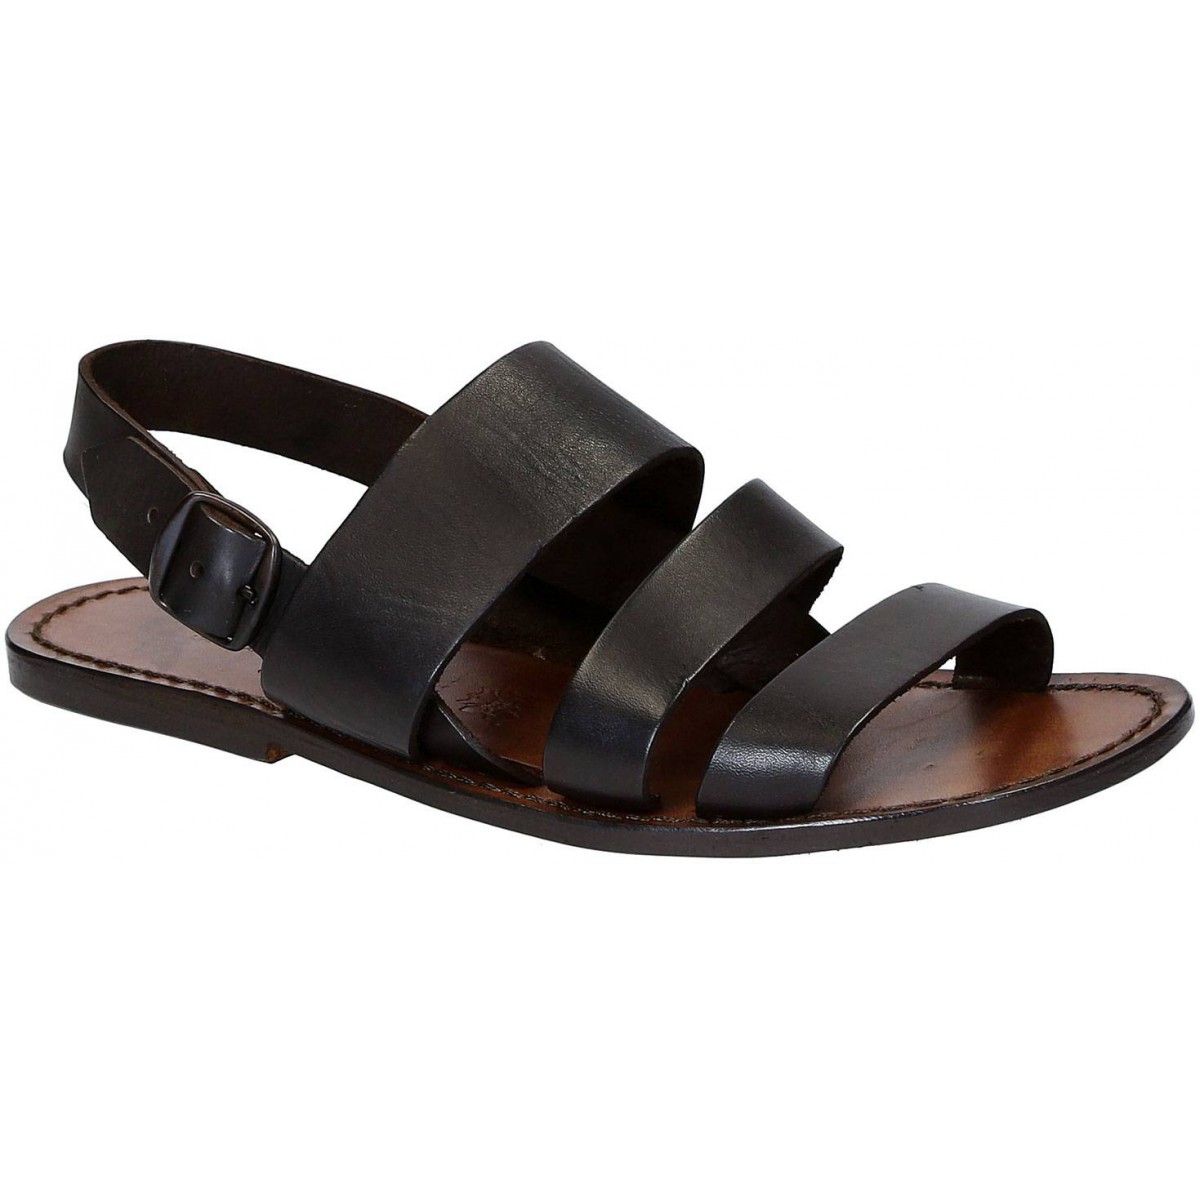 Brown leather sandals handmade in Italy 